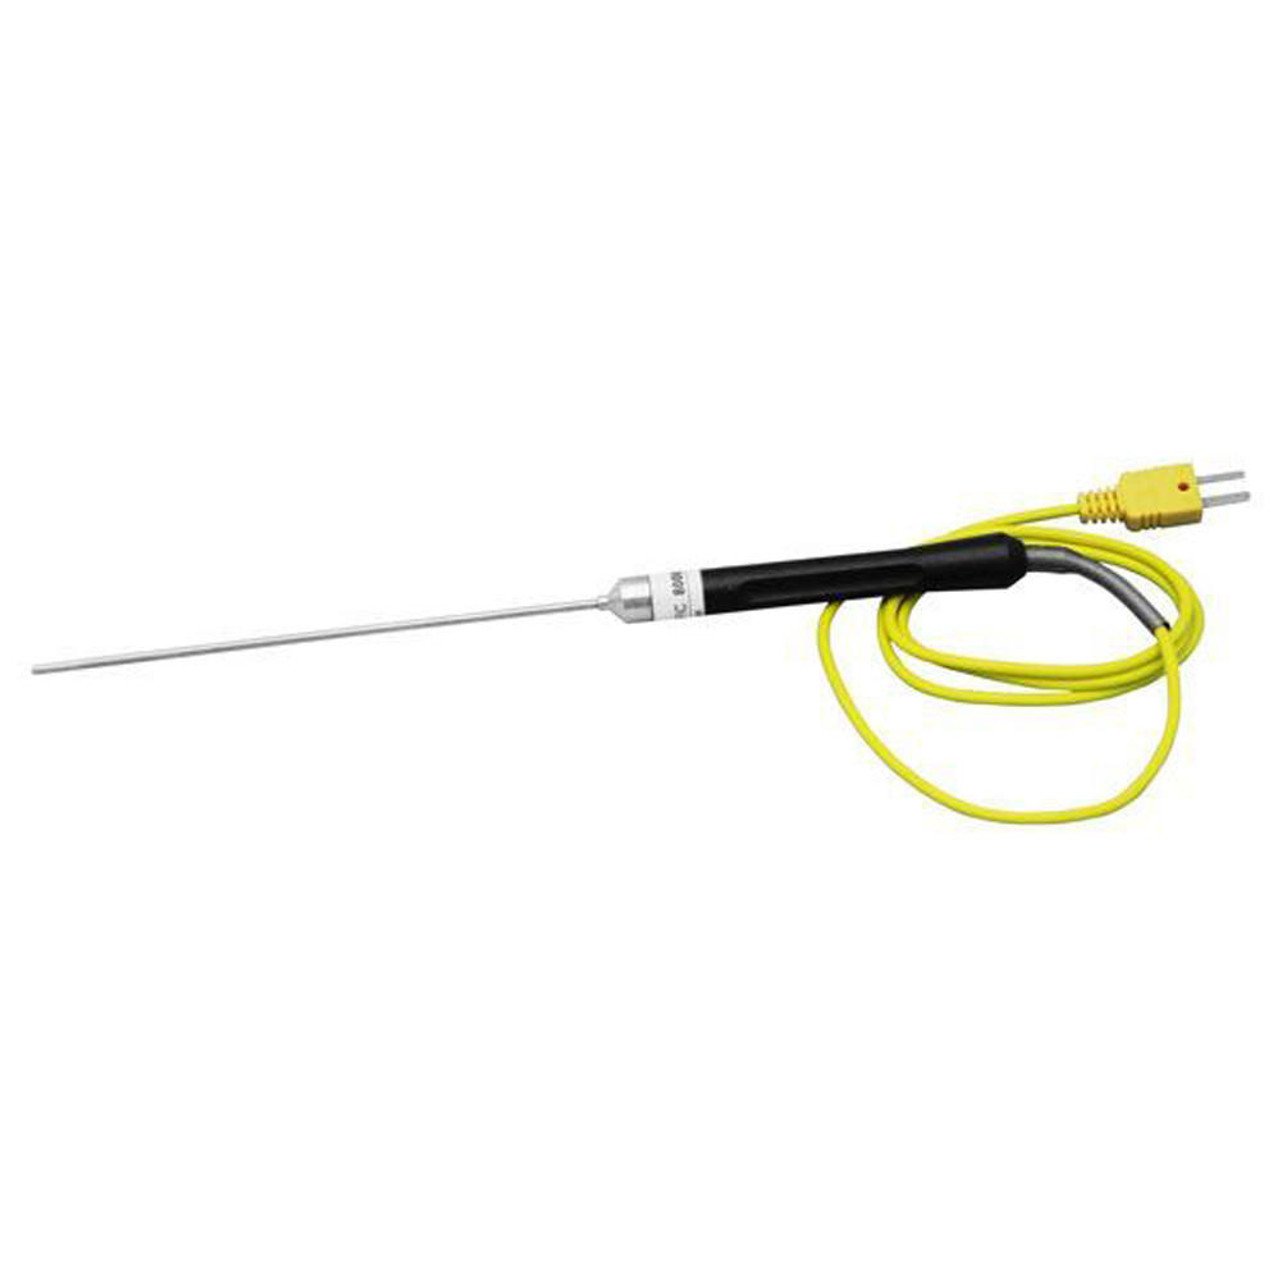 Digital K-Type Thermocouple Thermometer & 6 Stainles Steel Sensor